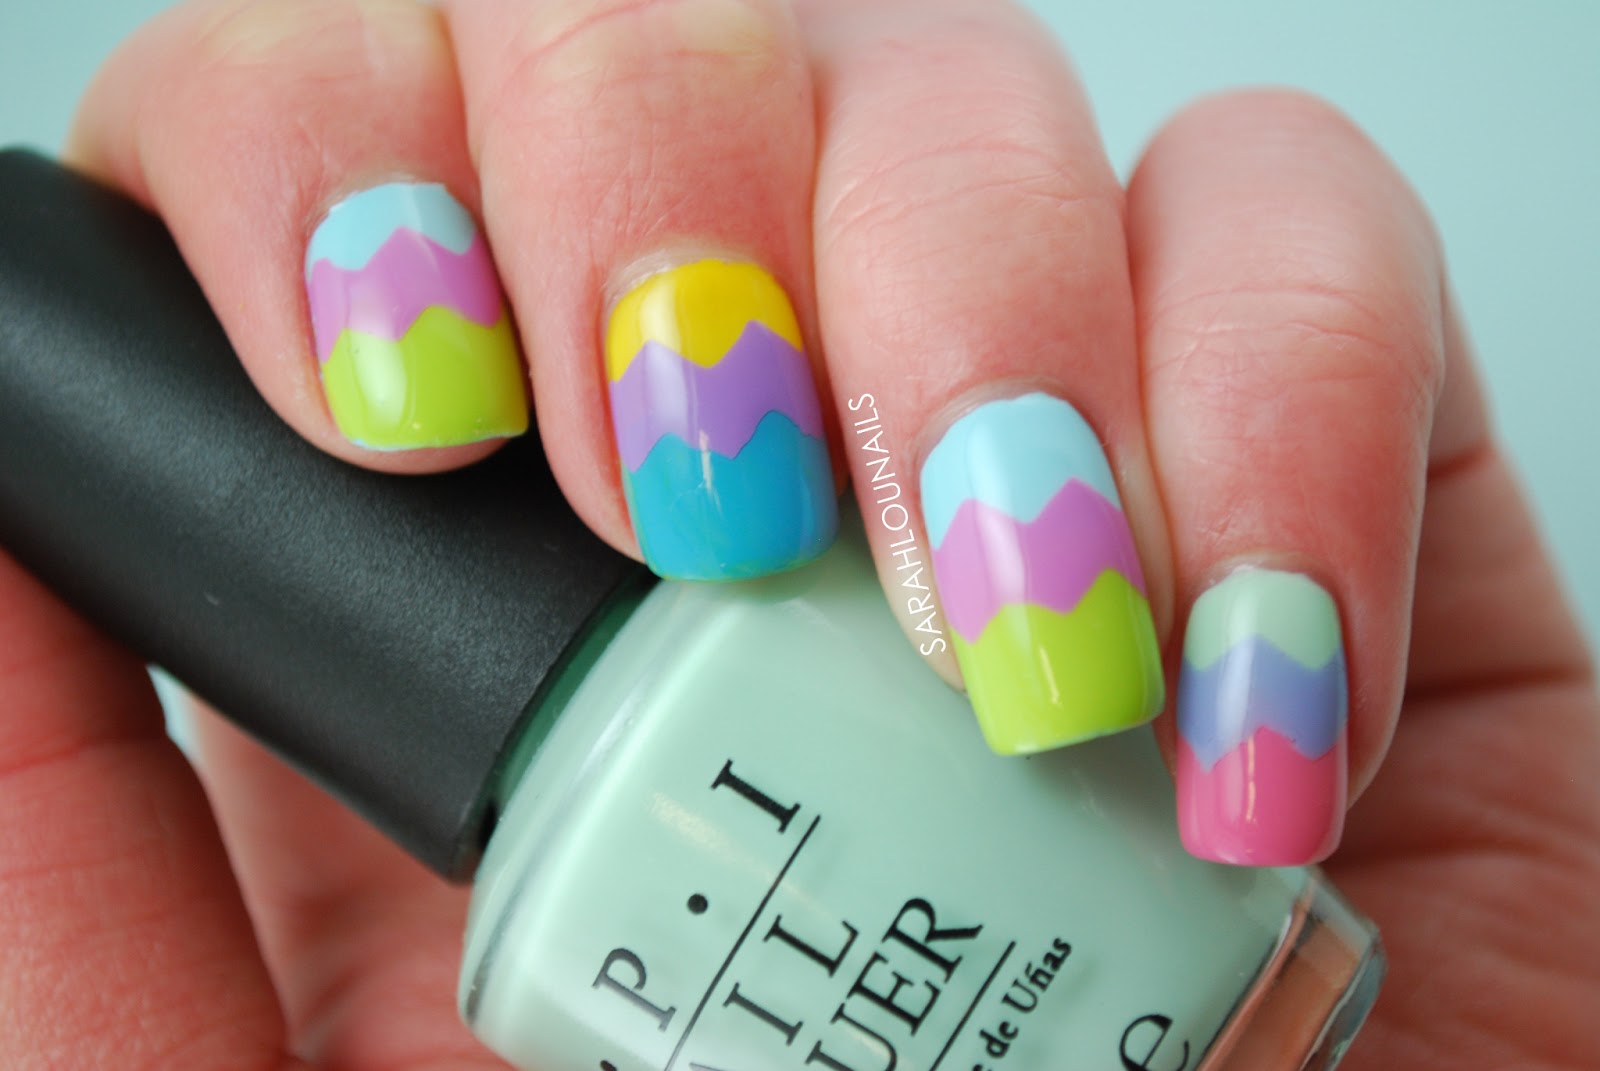 1. Easter Egg Stiletto Nails - wide 4